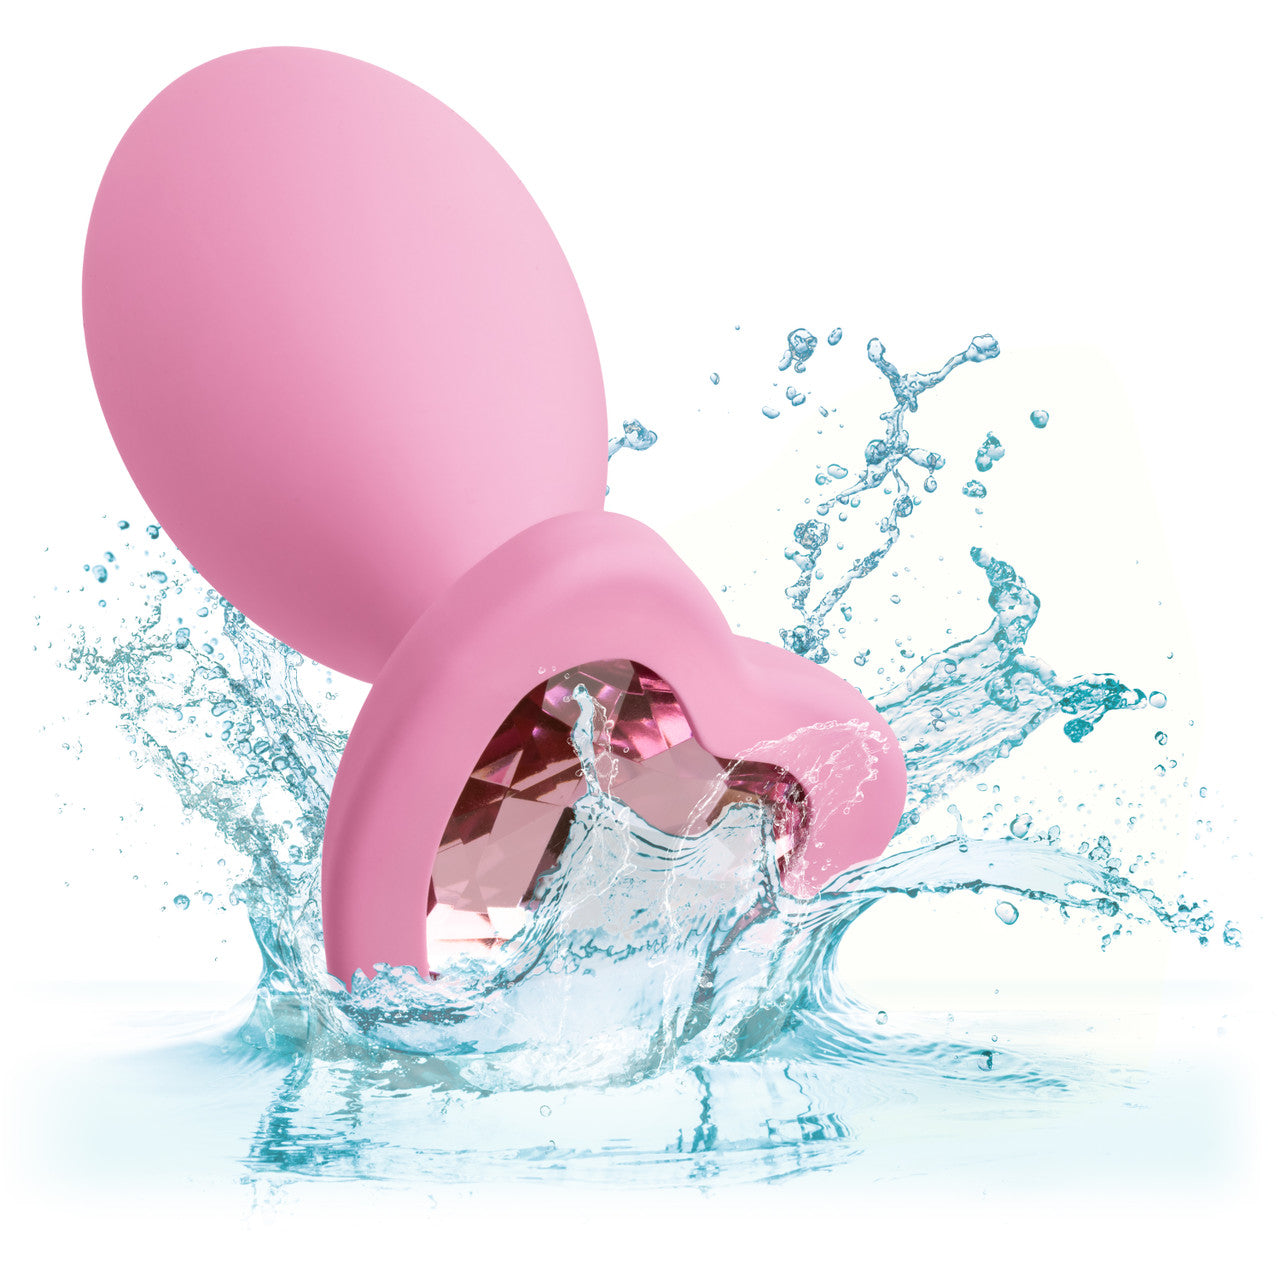 Pink egg shaped anal plug with a heart shaped gem at base splashing in water.